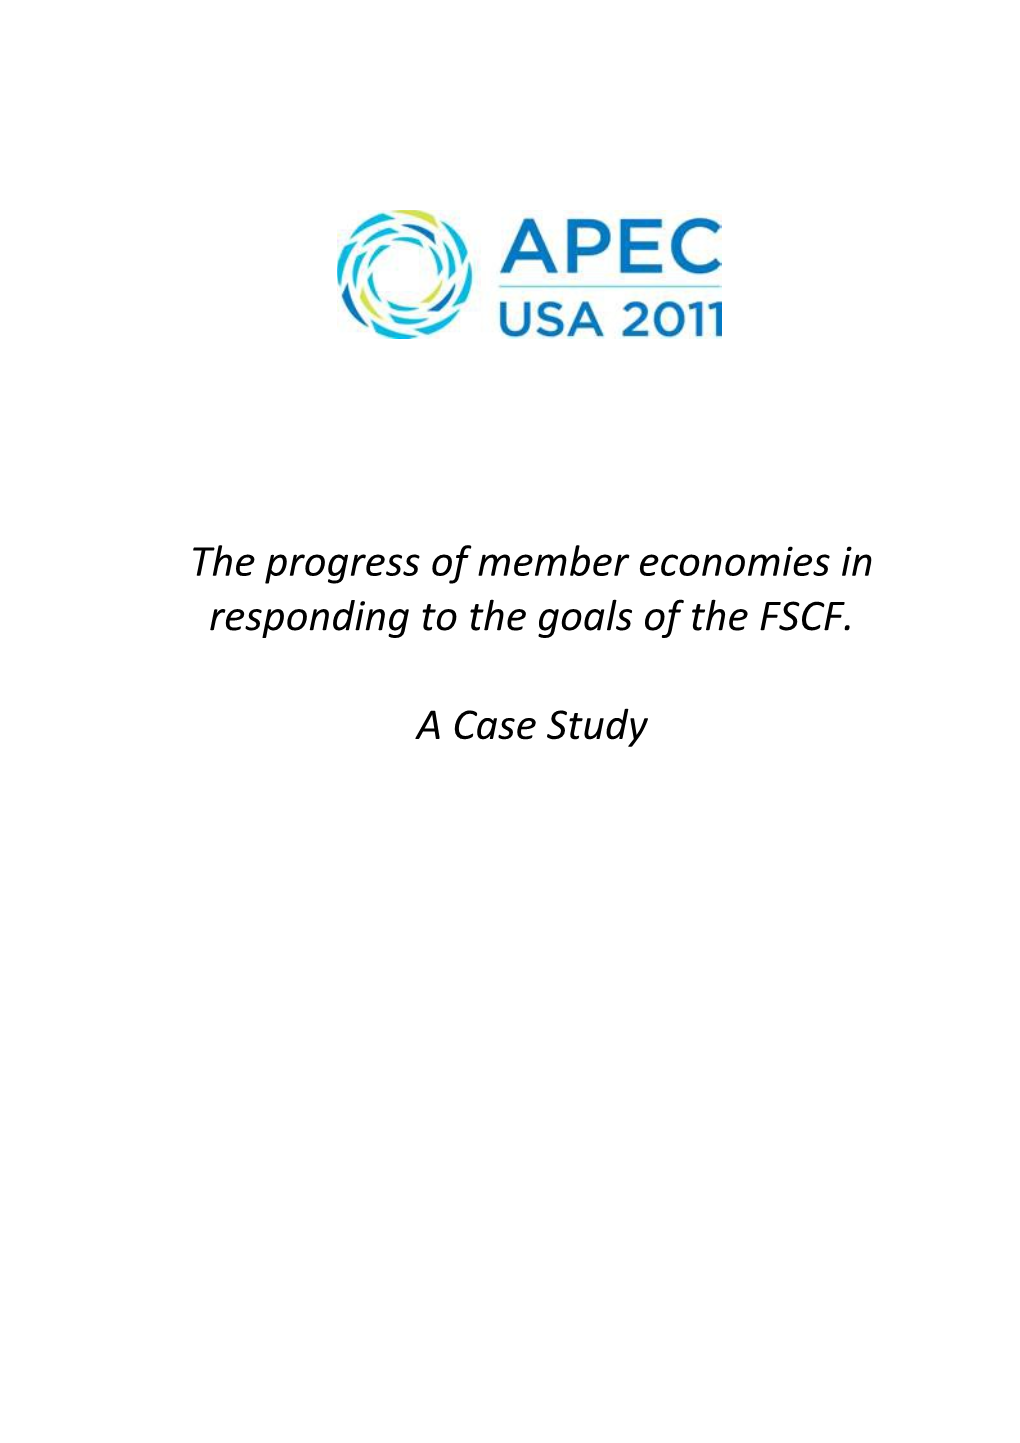 Progress in Responding to the APEC Food Safety Cooperation Forum (FSCF) Goals